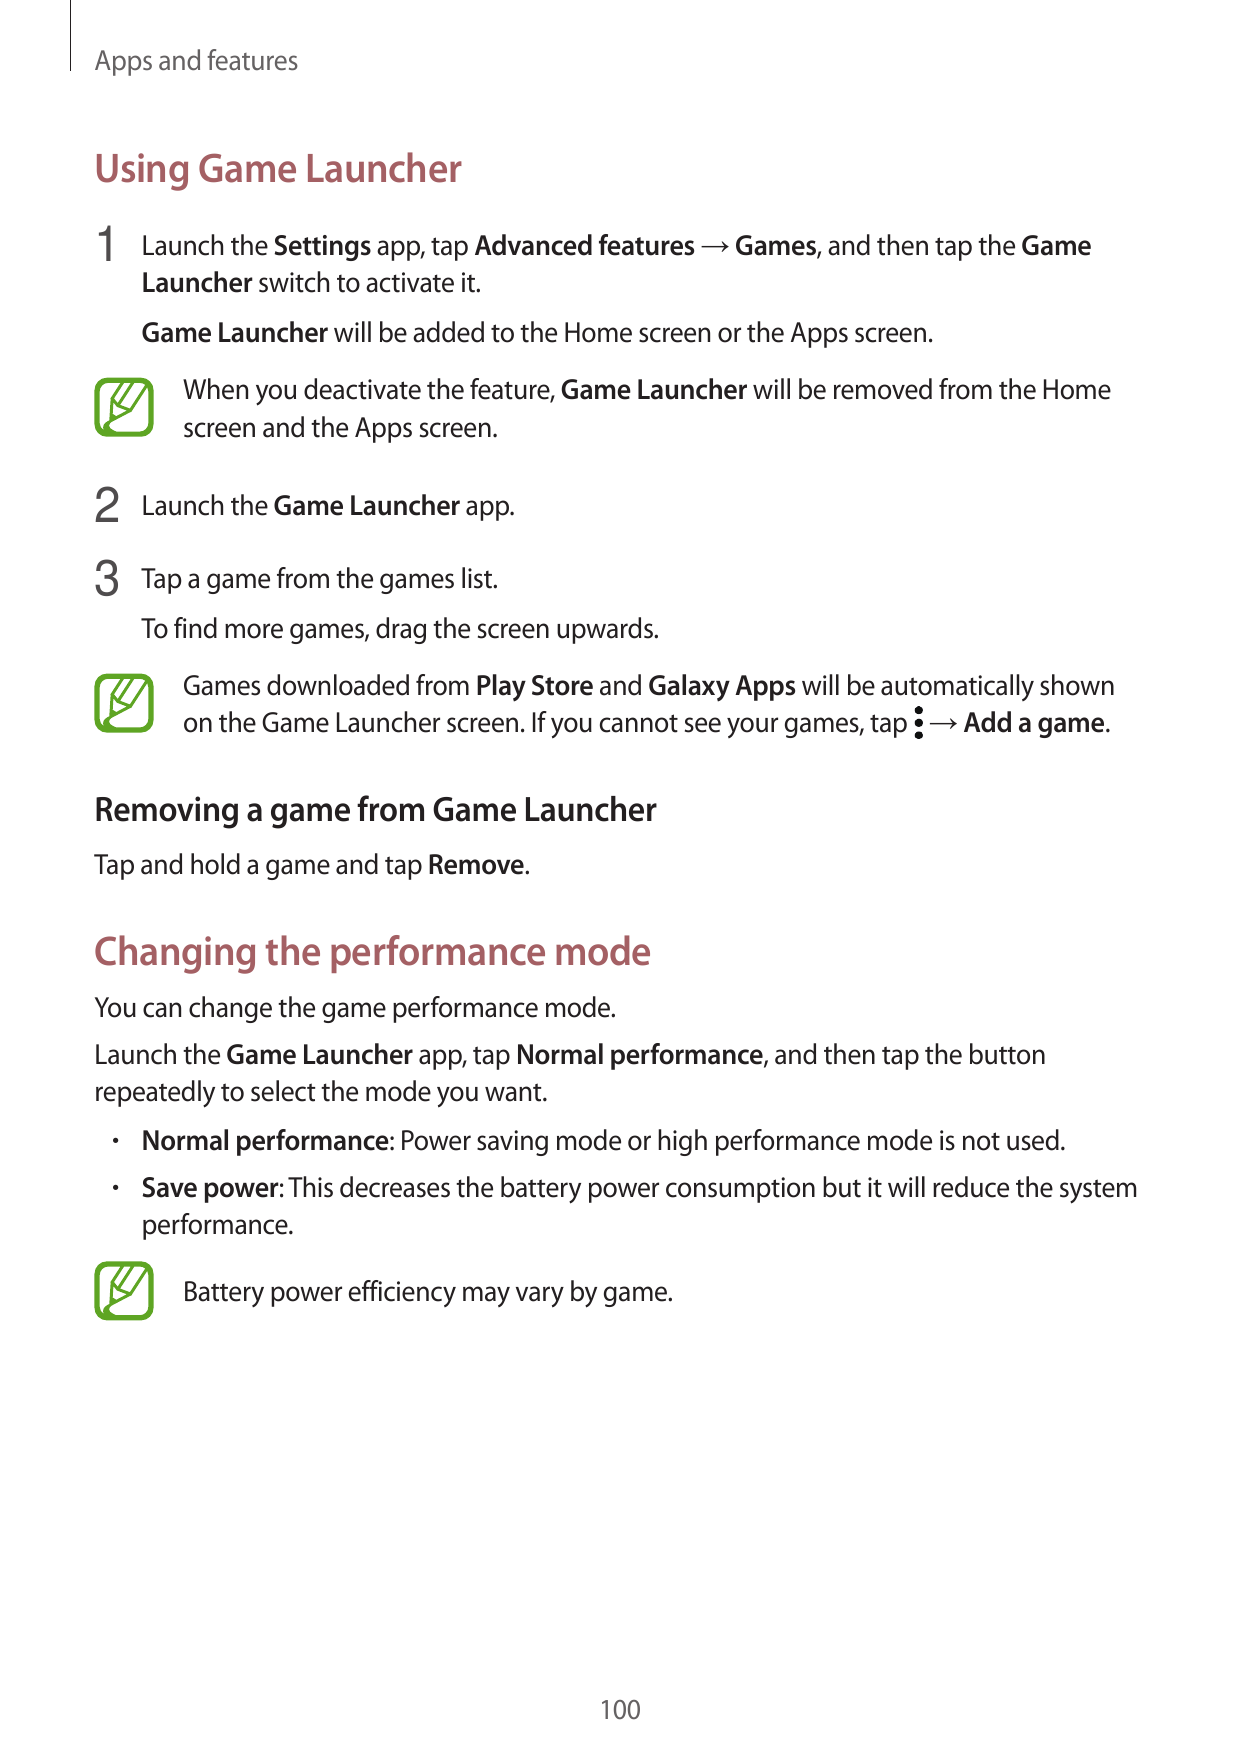 Apps and featuresUsing Game Launcher1 Launch the Settings app, tap Advanced features → Games, and then tap the GameLauncher swit